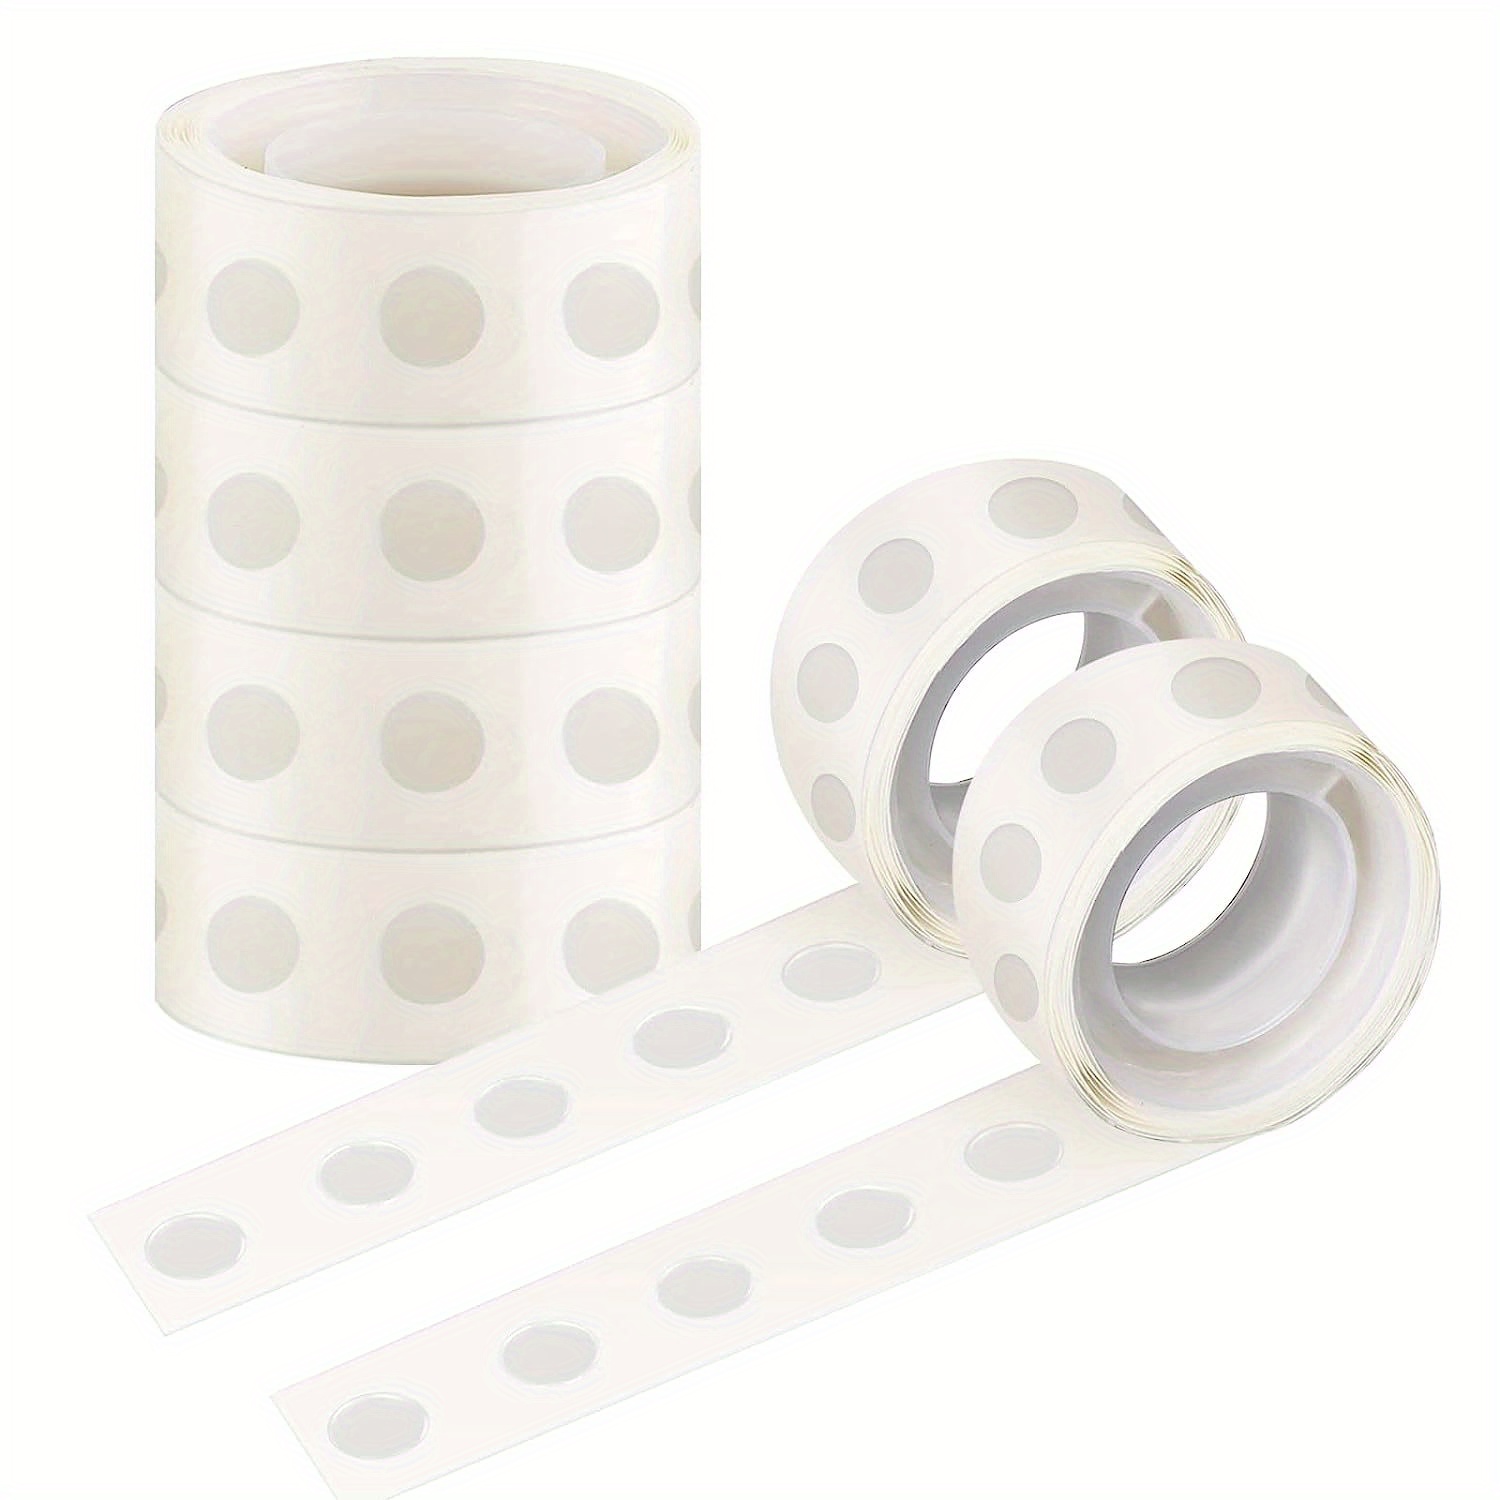 100 Pack, Clear Removable Balloon Arch Glue Dots, Adhesive Points